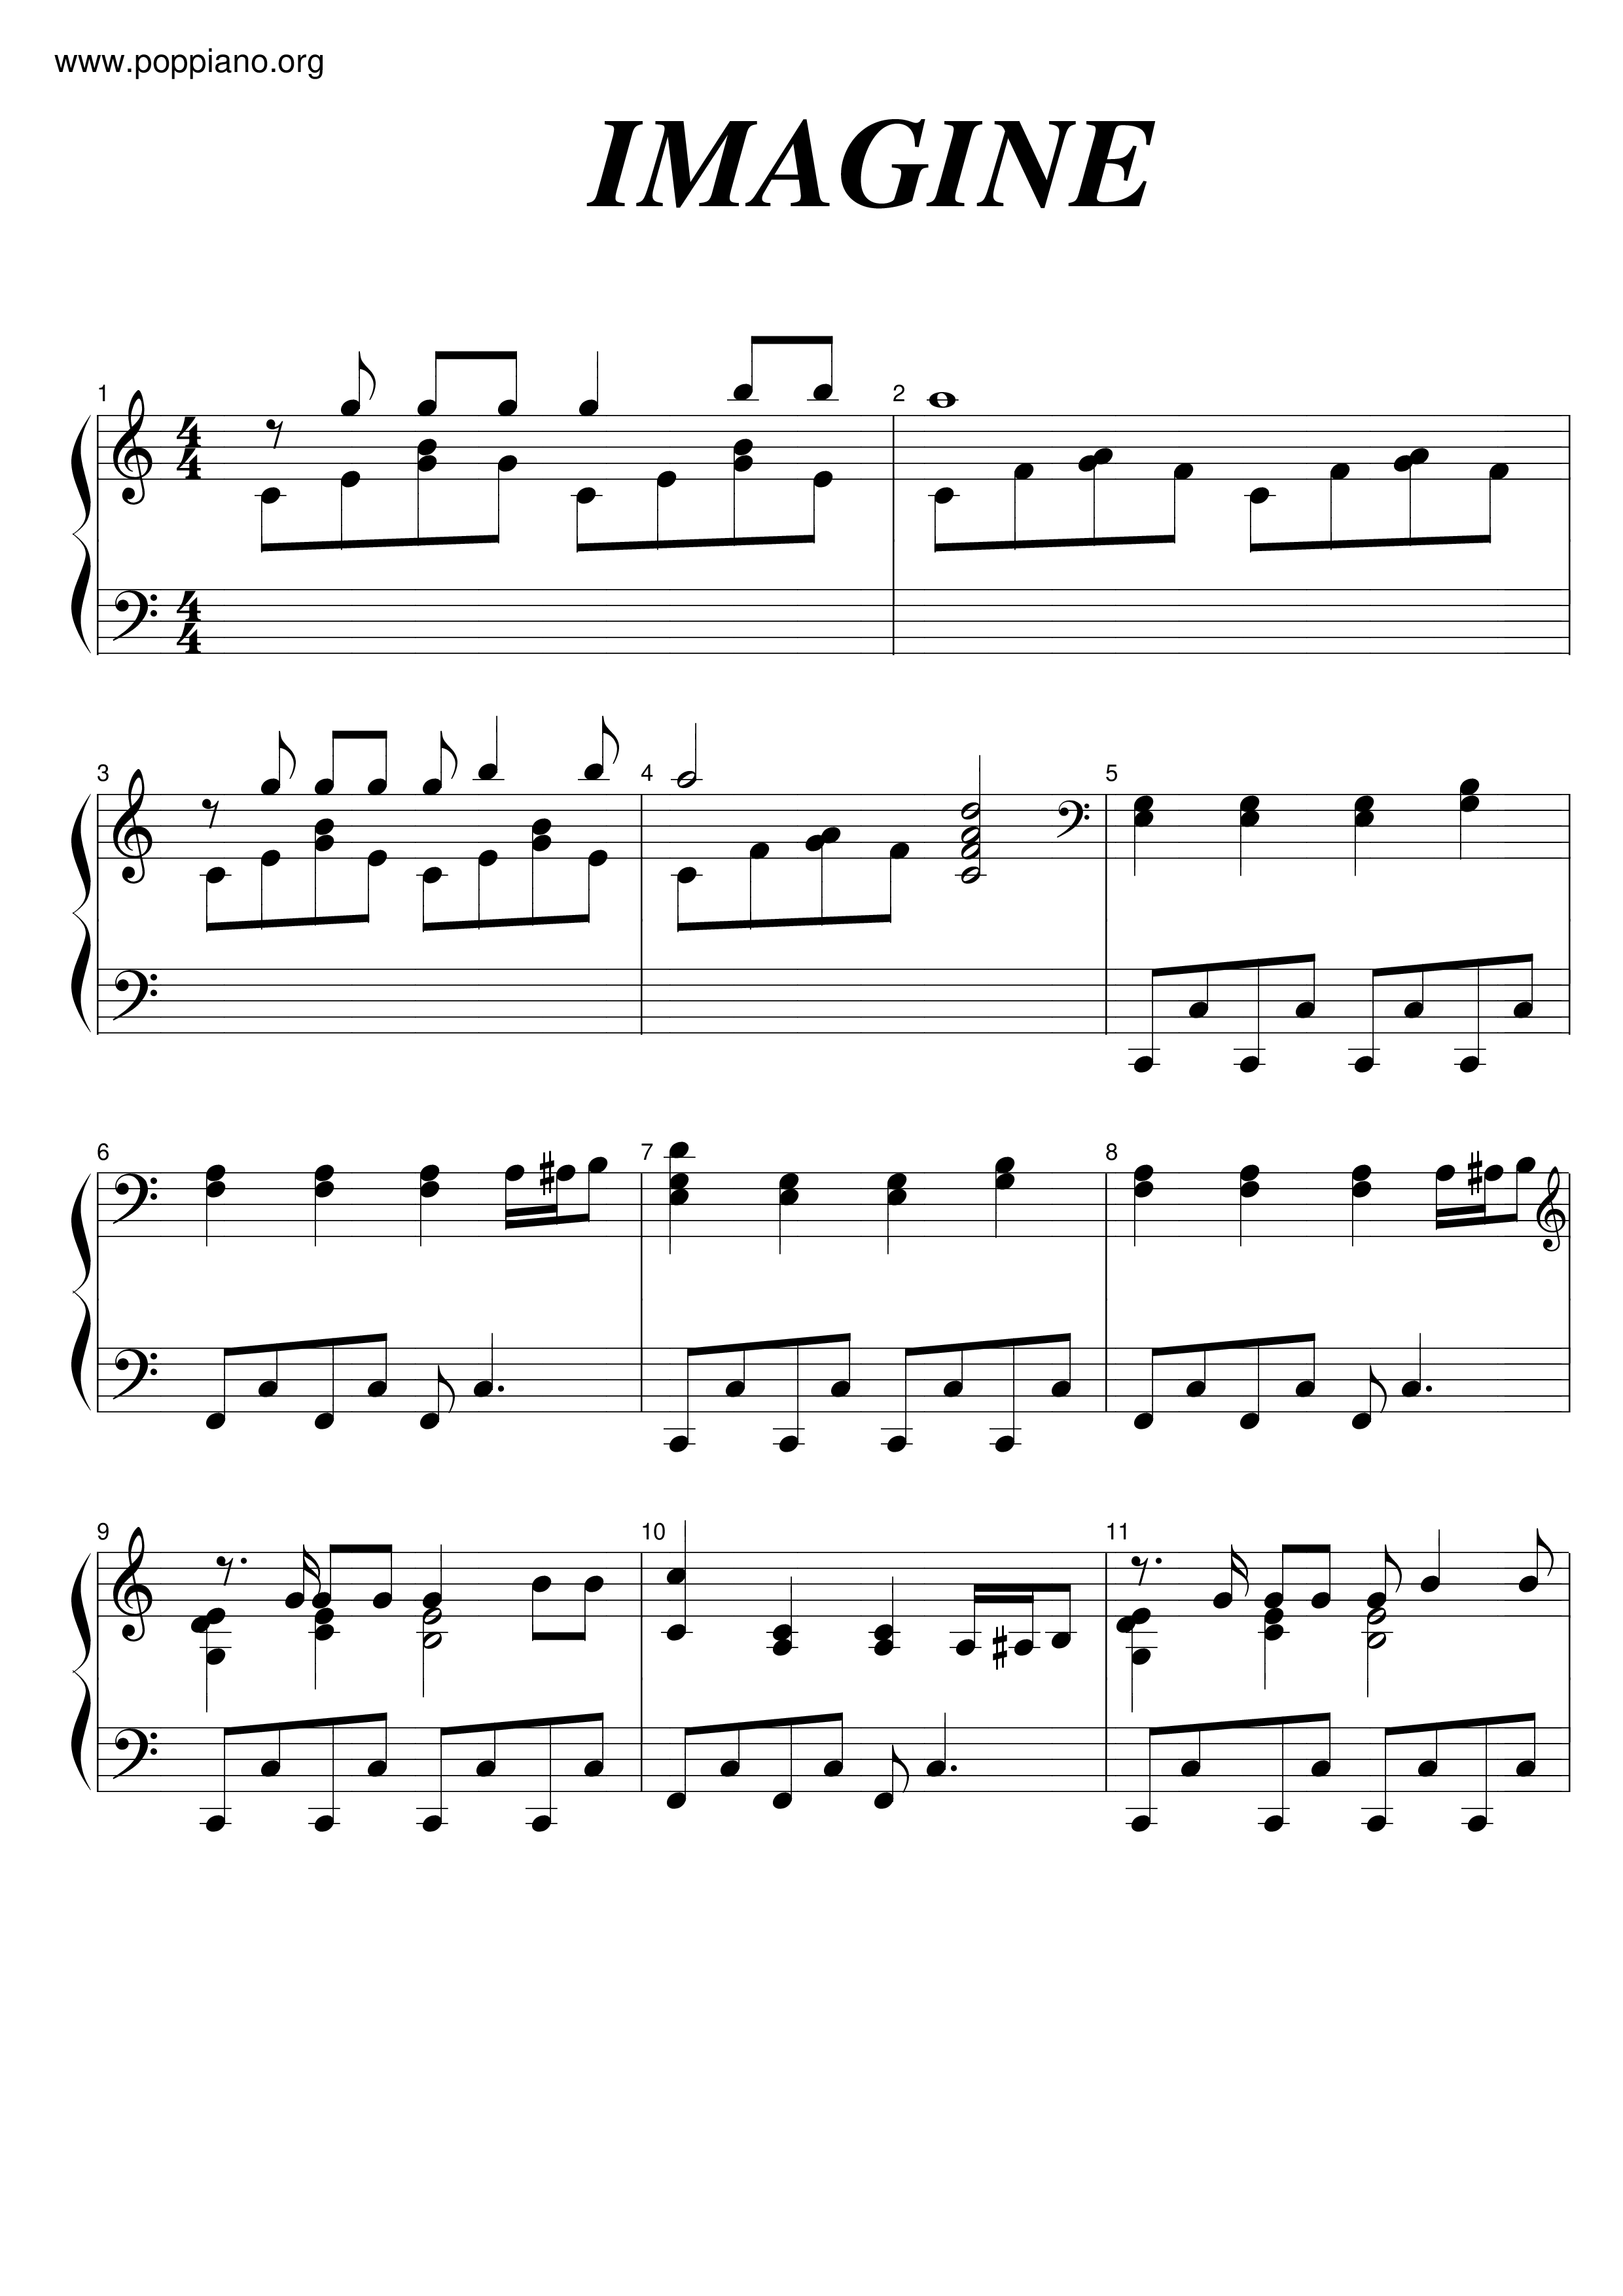 Imagine By John Lennon Digital Sheet Music For Score And Parts My Xxx